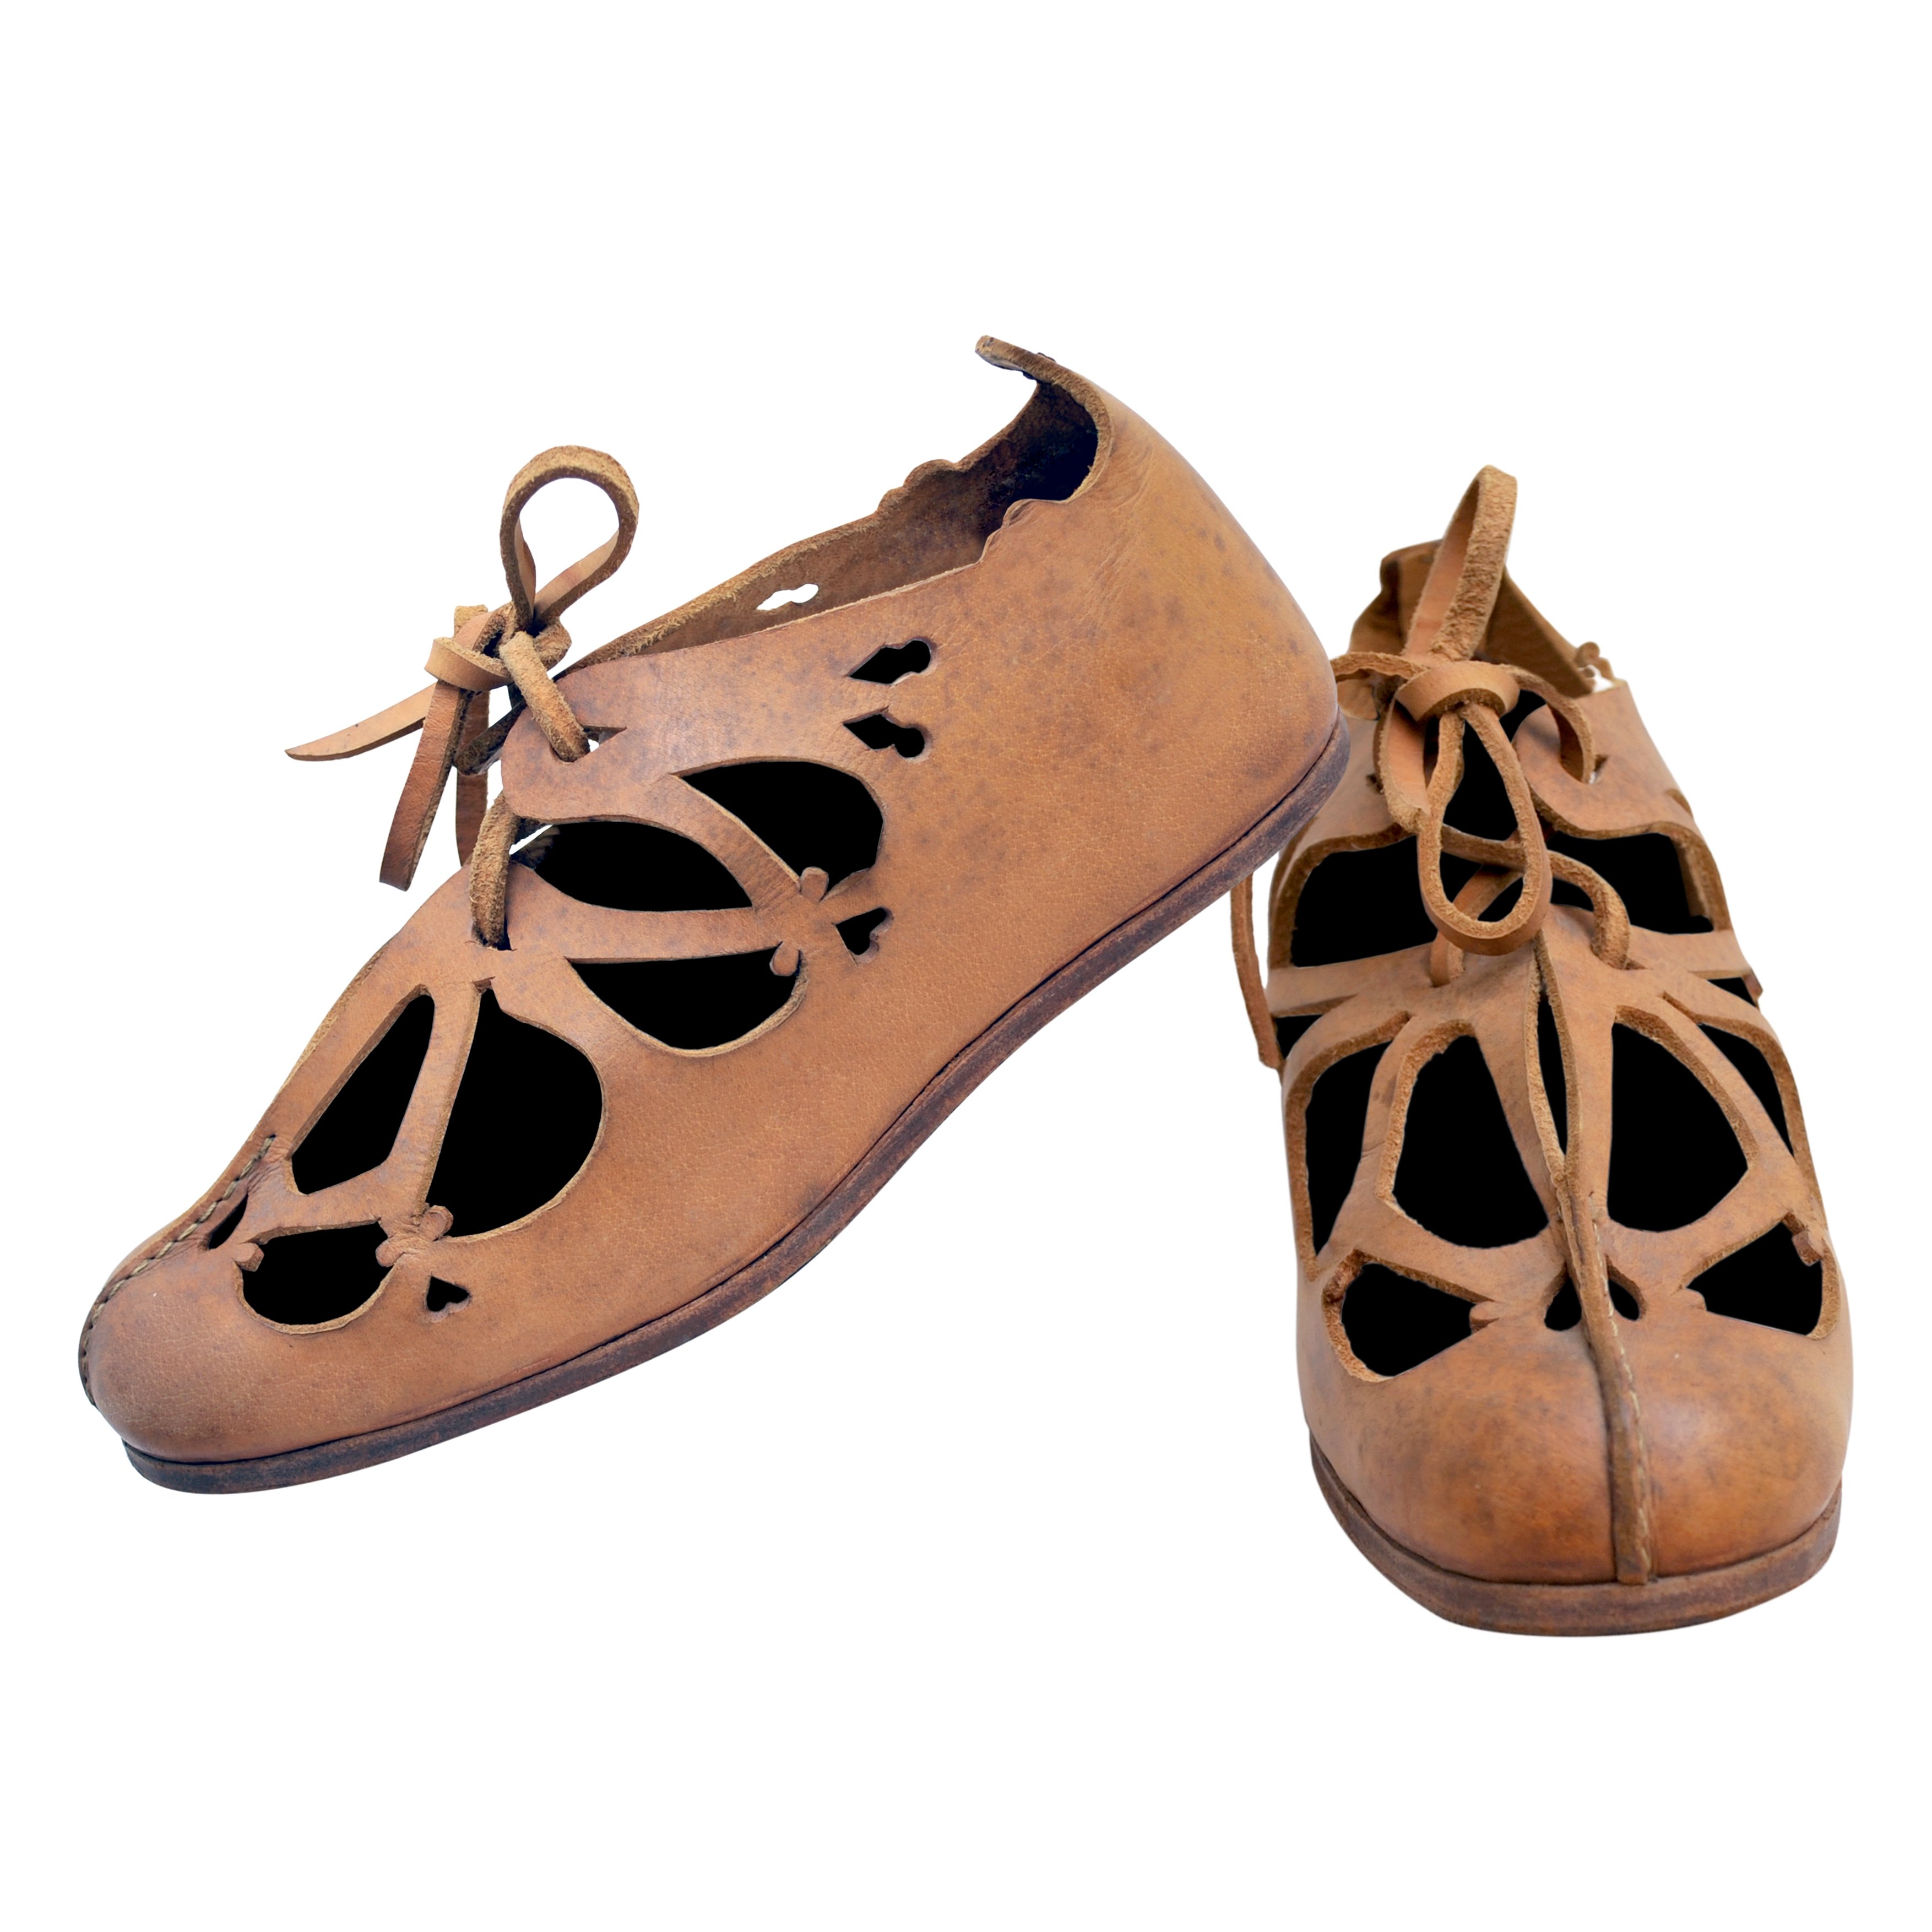 Roman shoes of the Bar Hill type with Hobils, Size 9